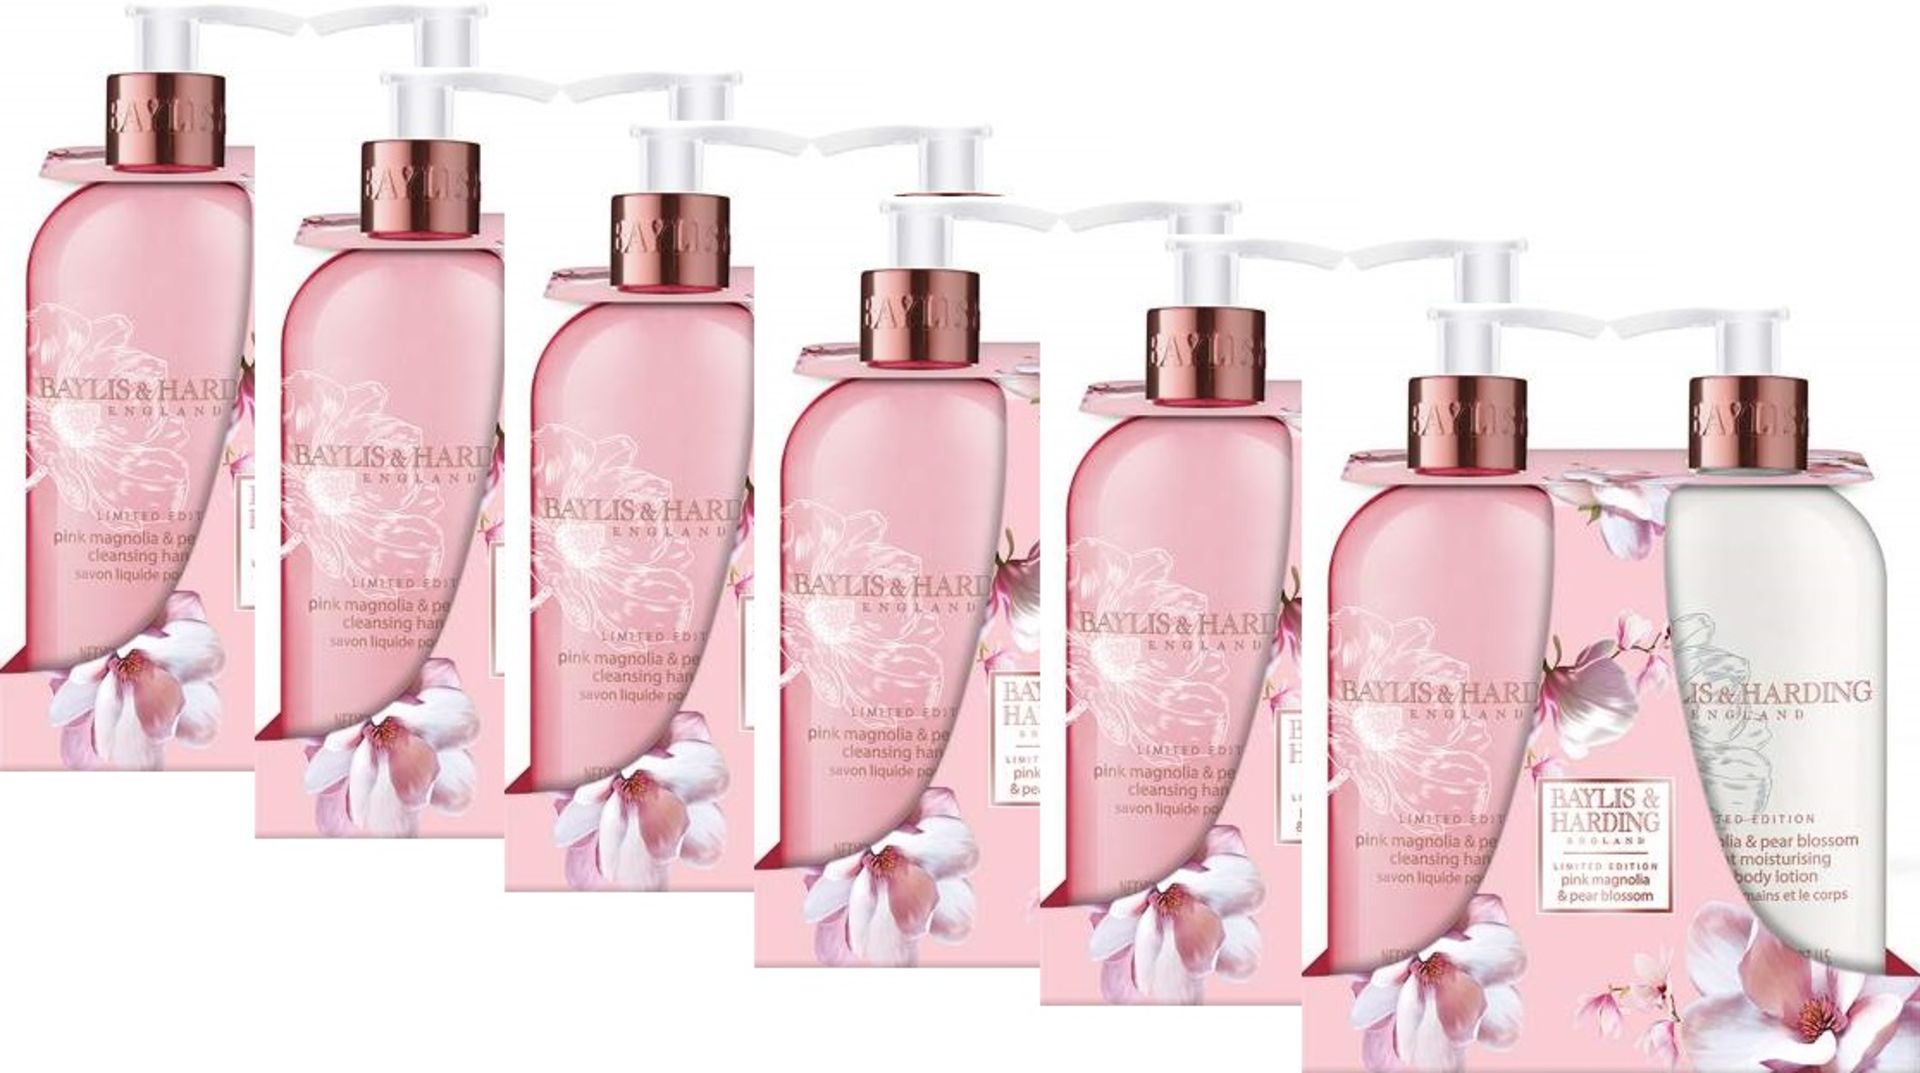 V *TRADE QTY* Brand New Six Gift Sets - Baylis & Harding Limited Edition Pink Magnolia And Pear